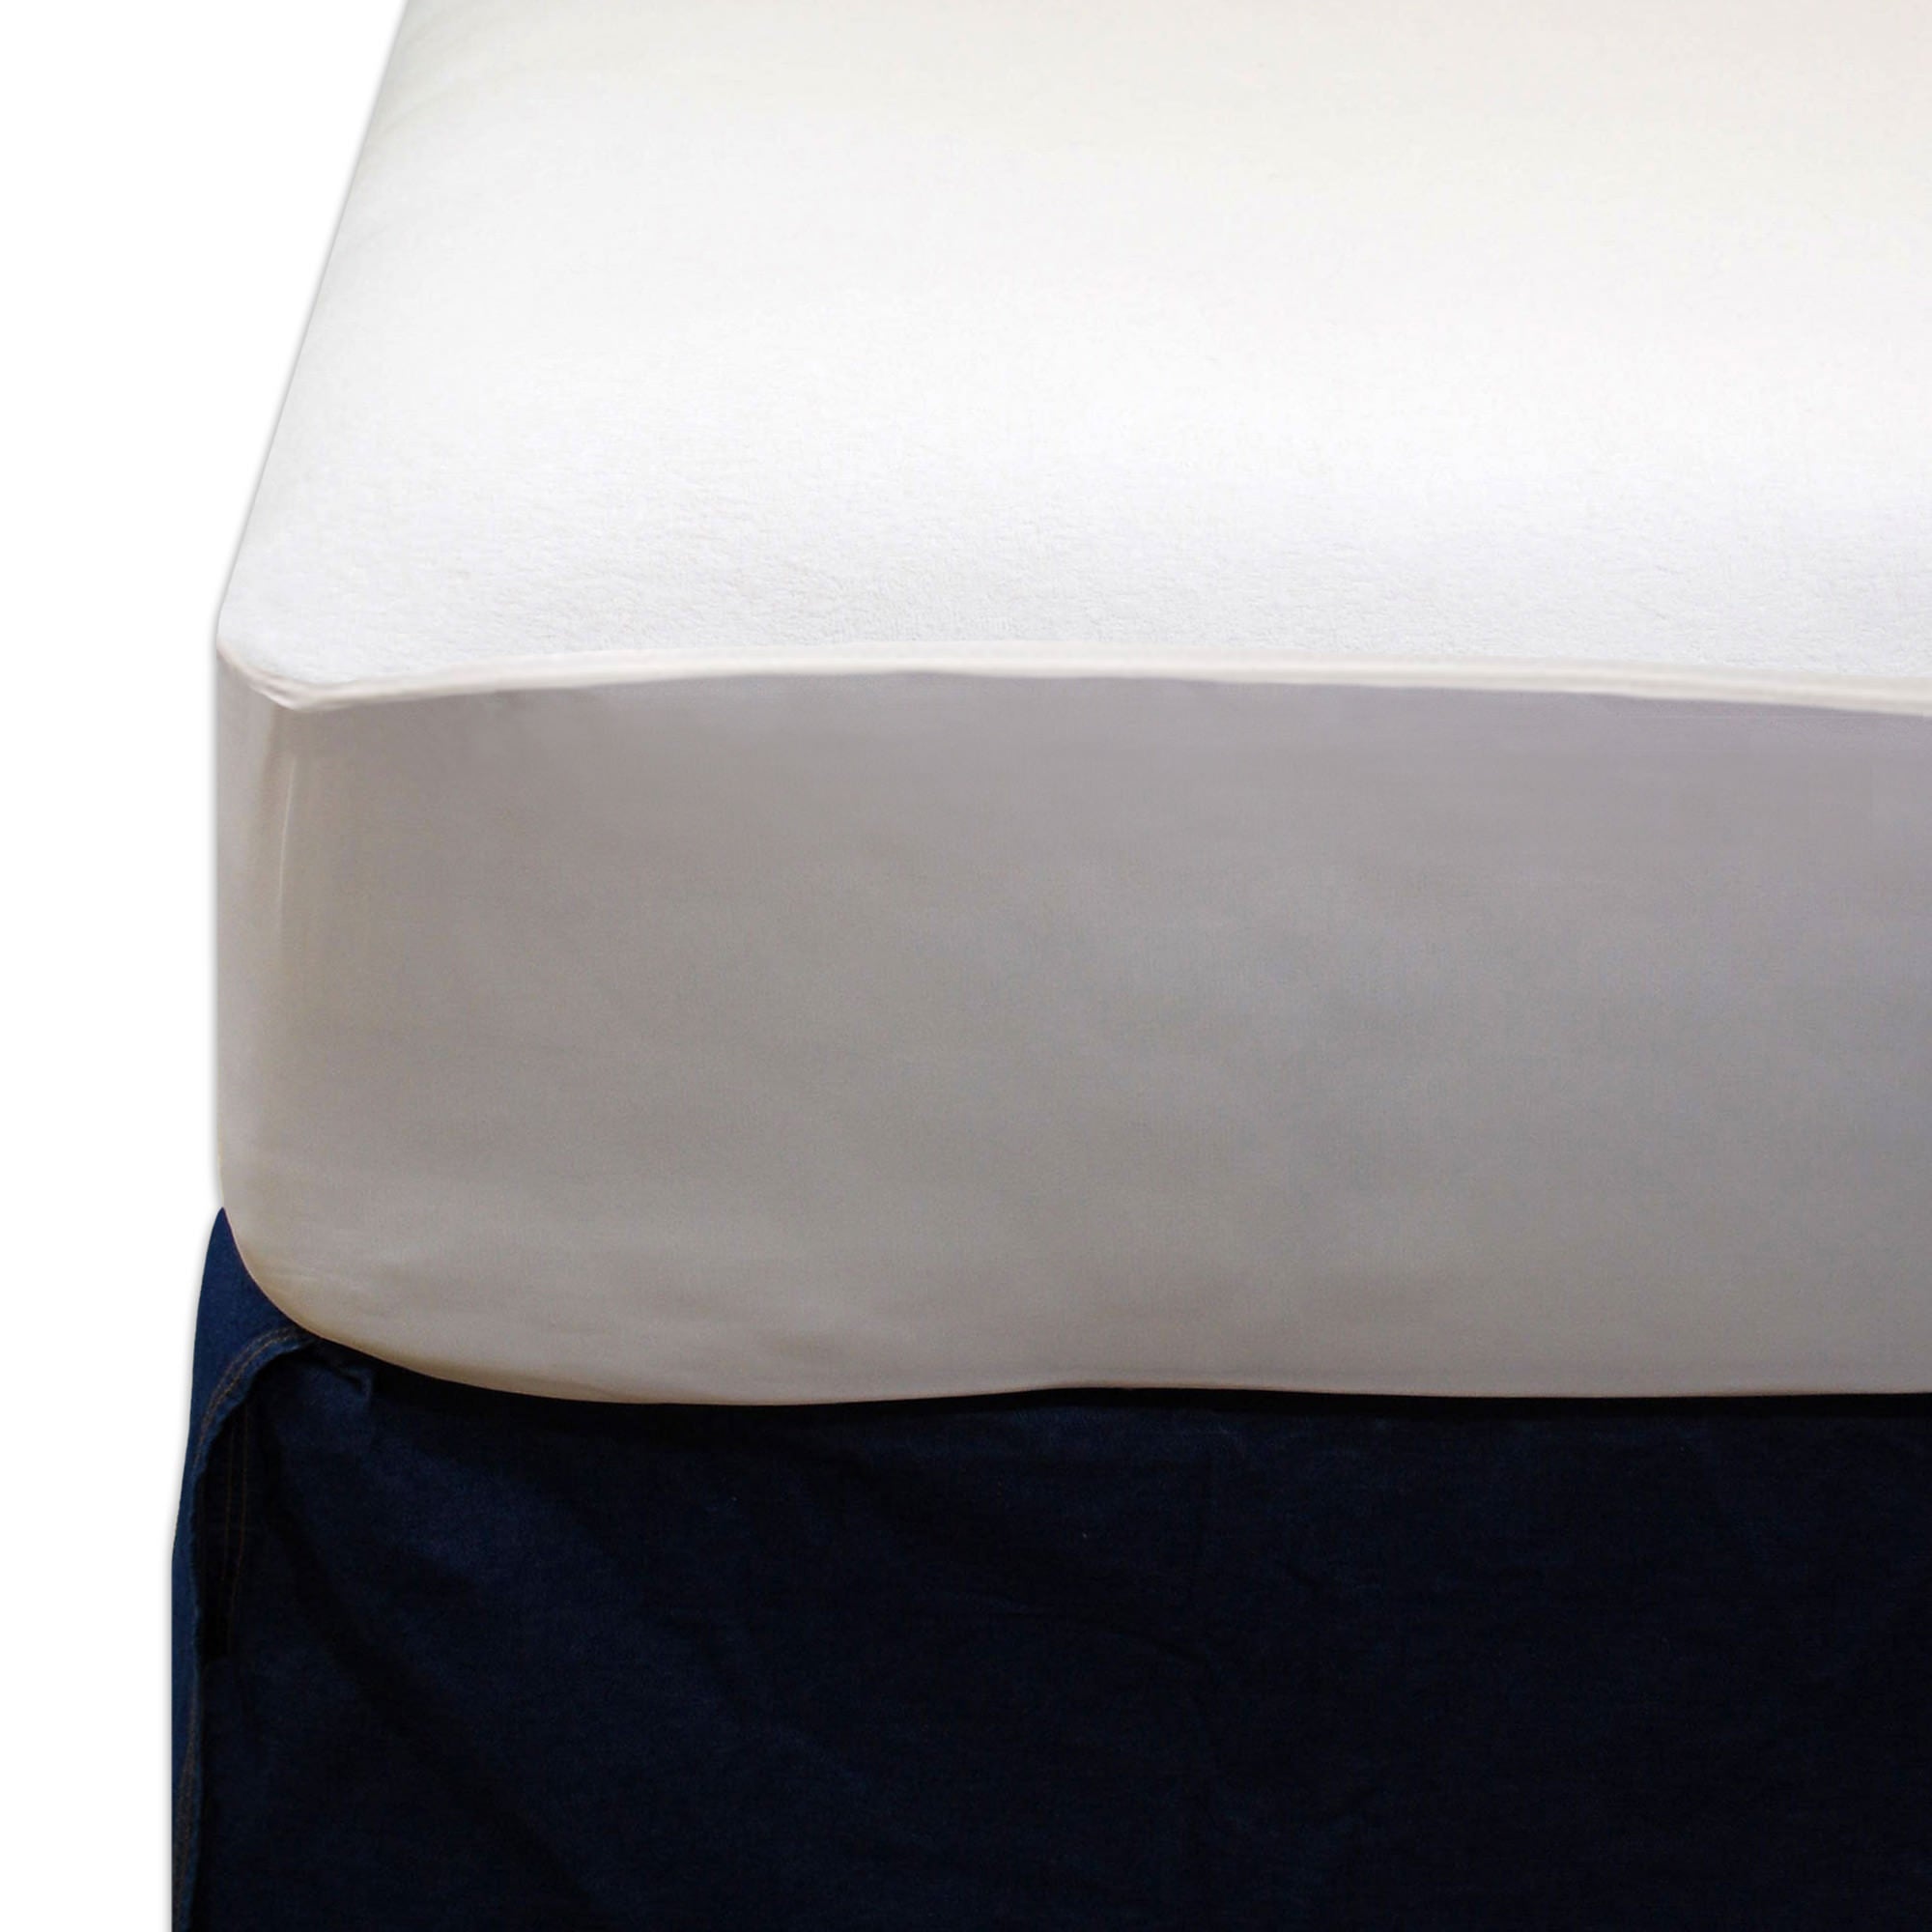 Bedding-Breathable, Waterproof Mattress Protector (Zippered, 9-15 inch depth)